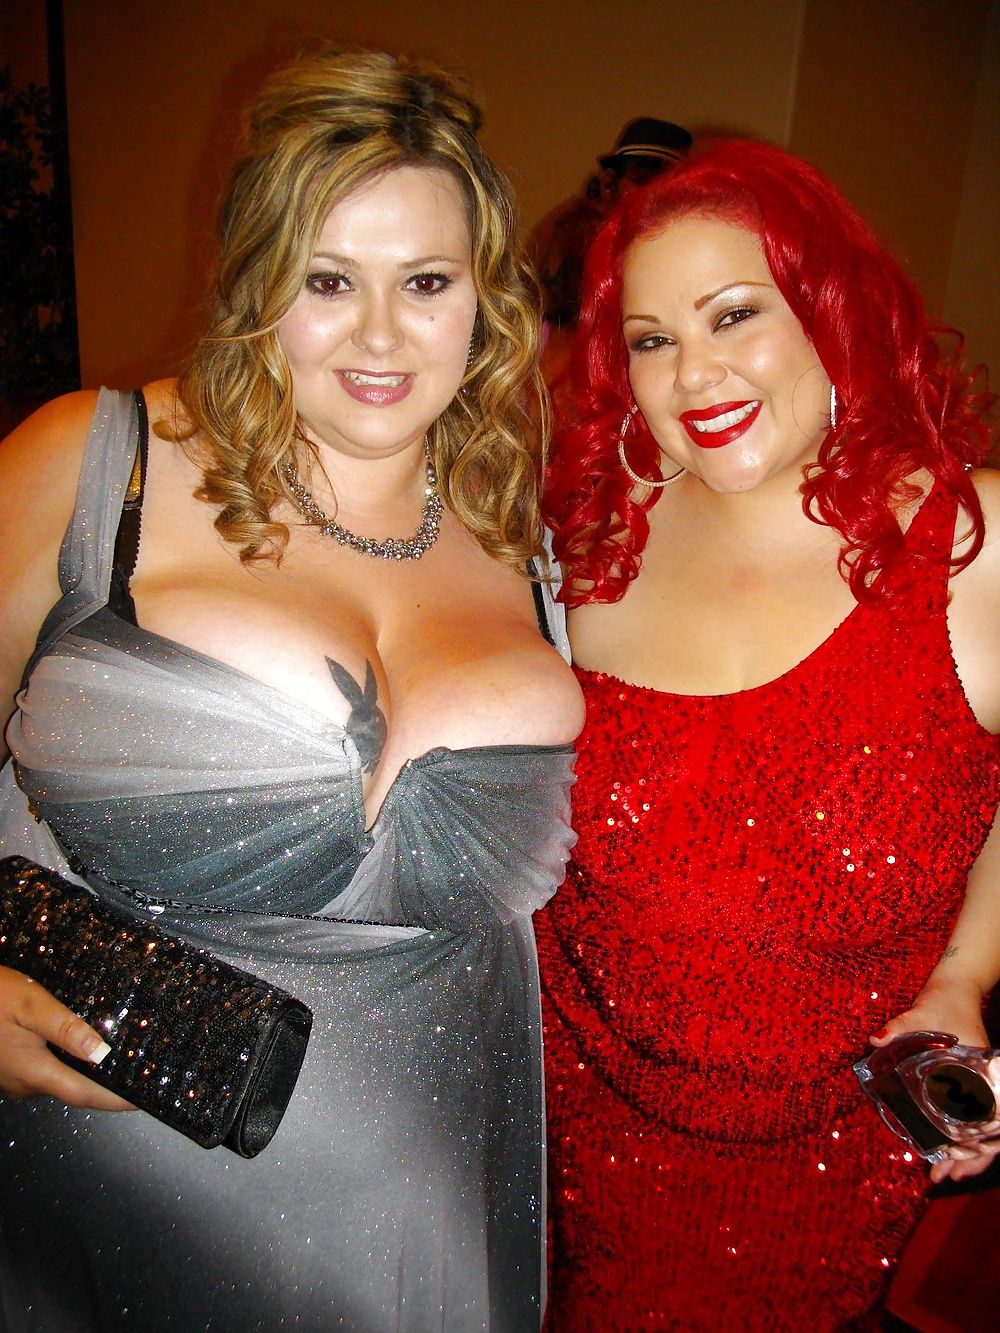 Curvy Beauties 33 Clothed Edition #13641266